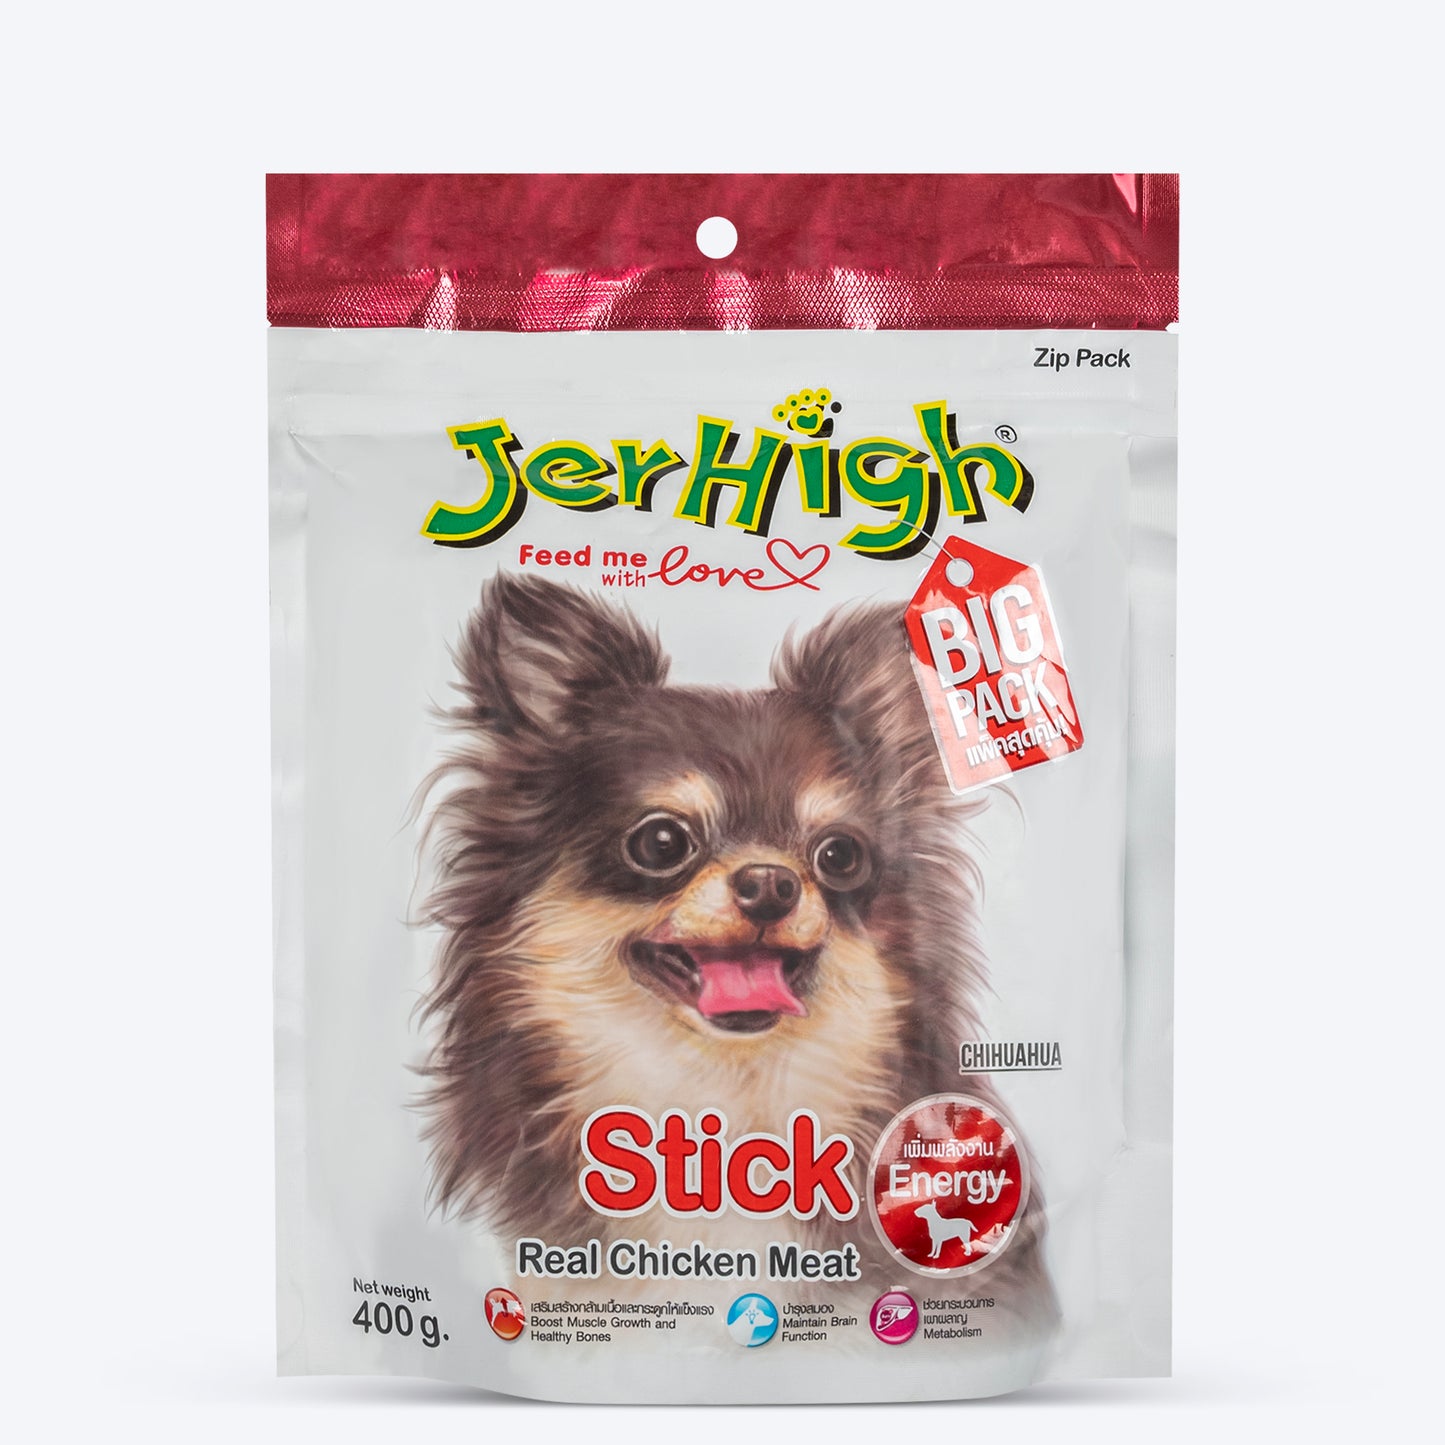 Jerhigh Stick Dog Treat Made with Real Chicken Meat_02